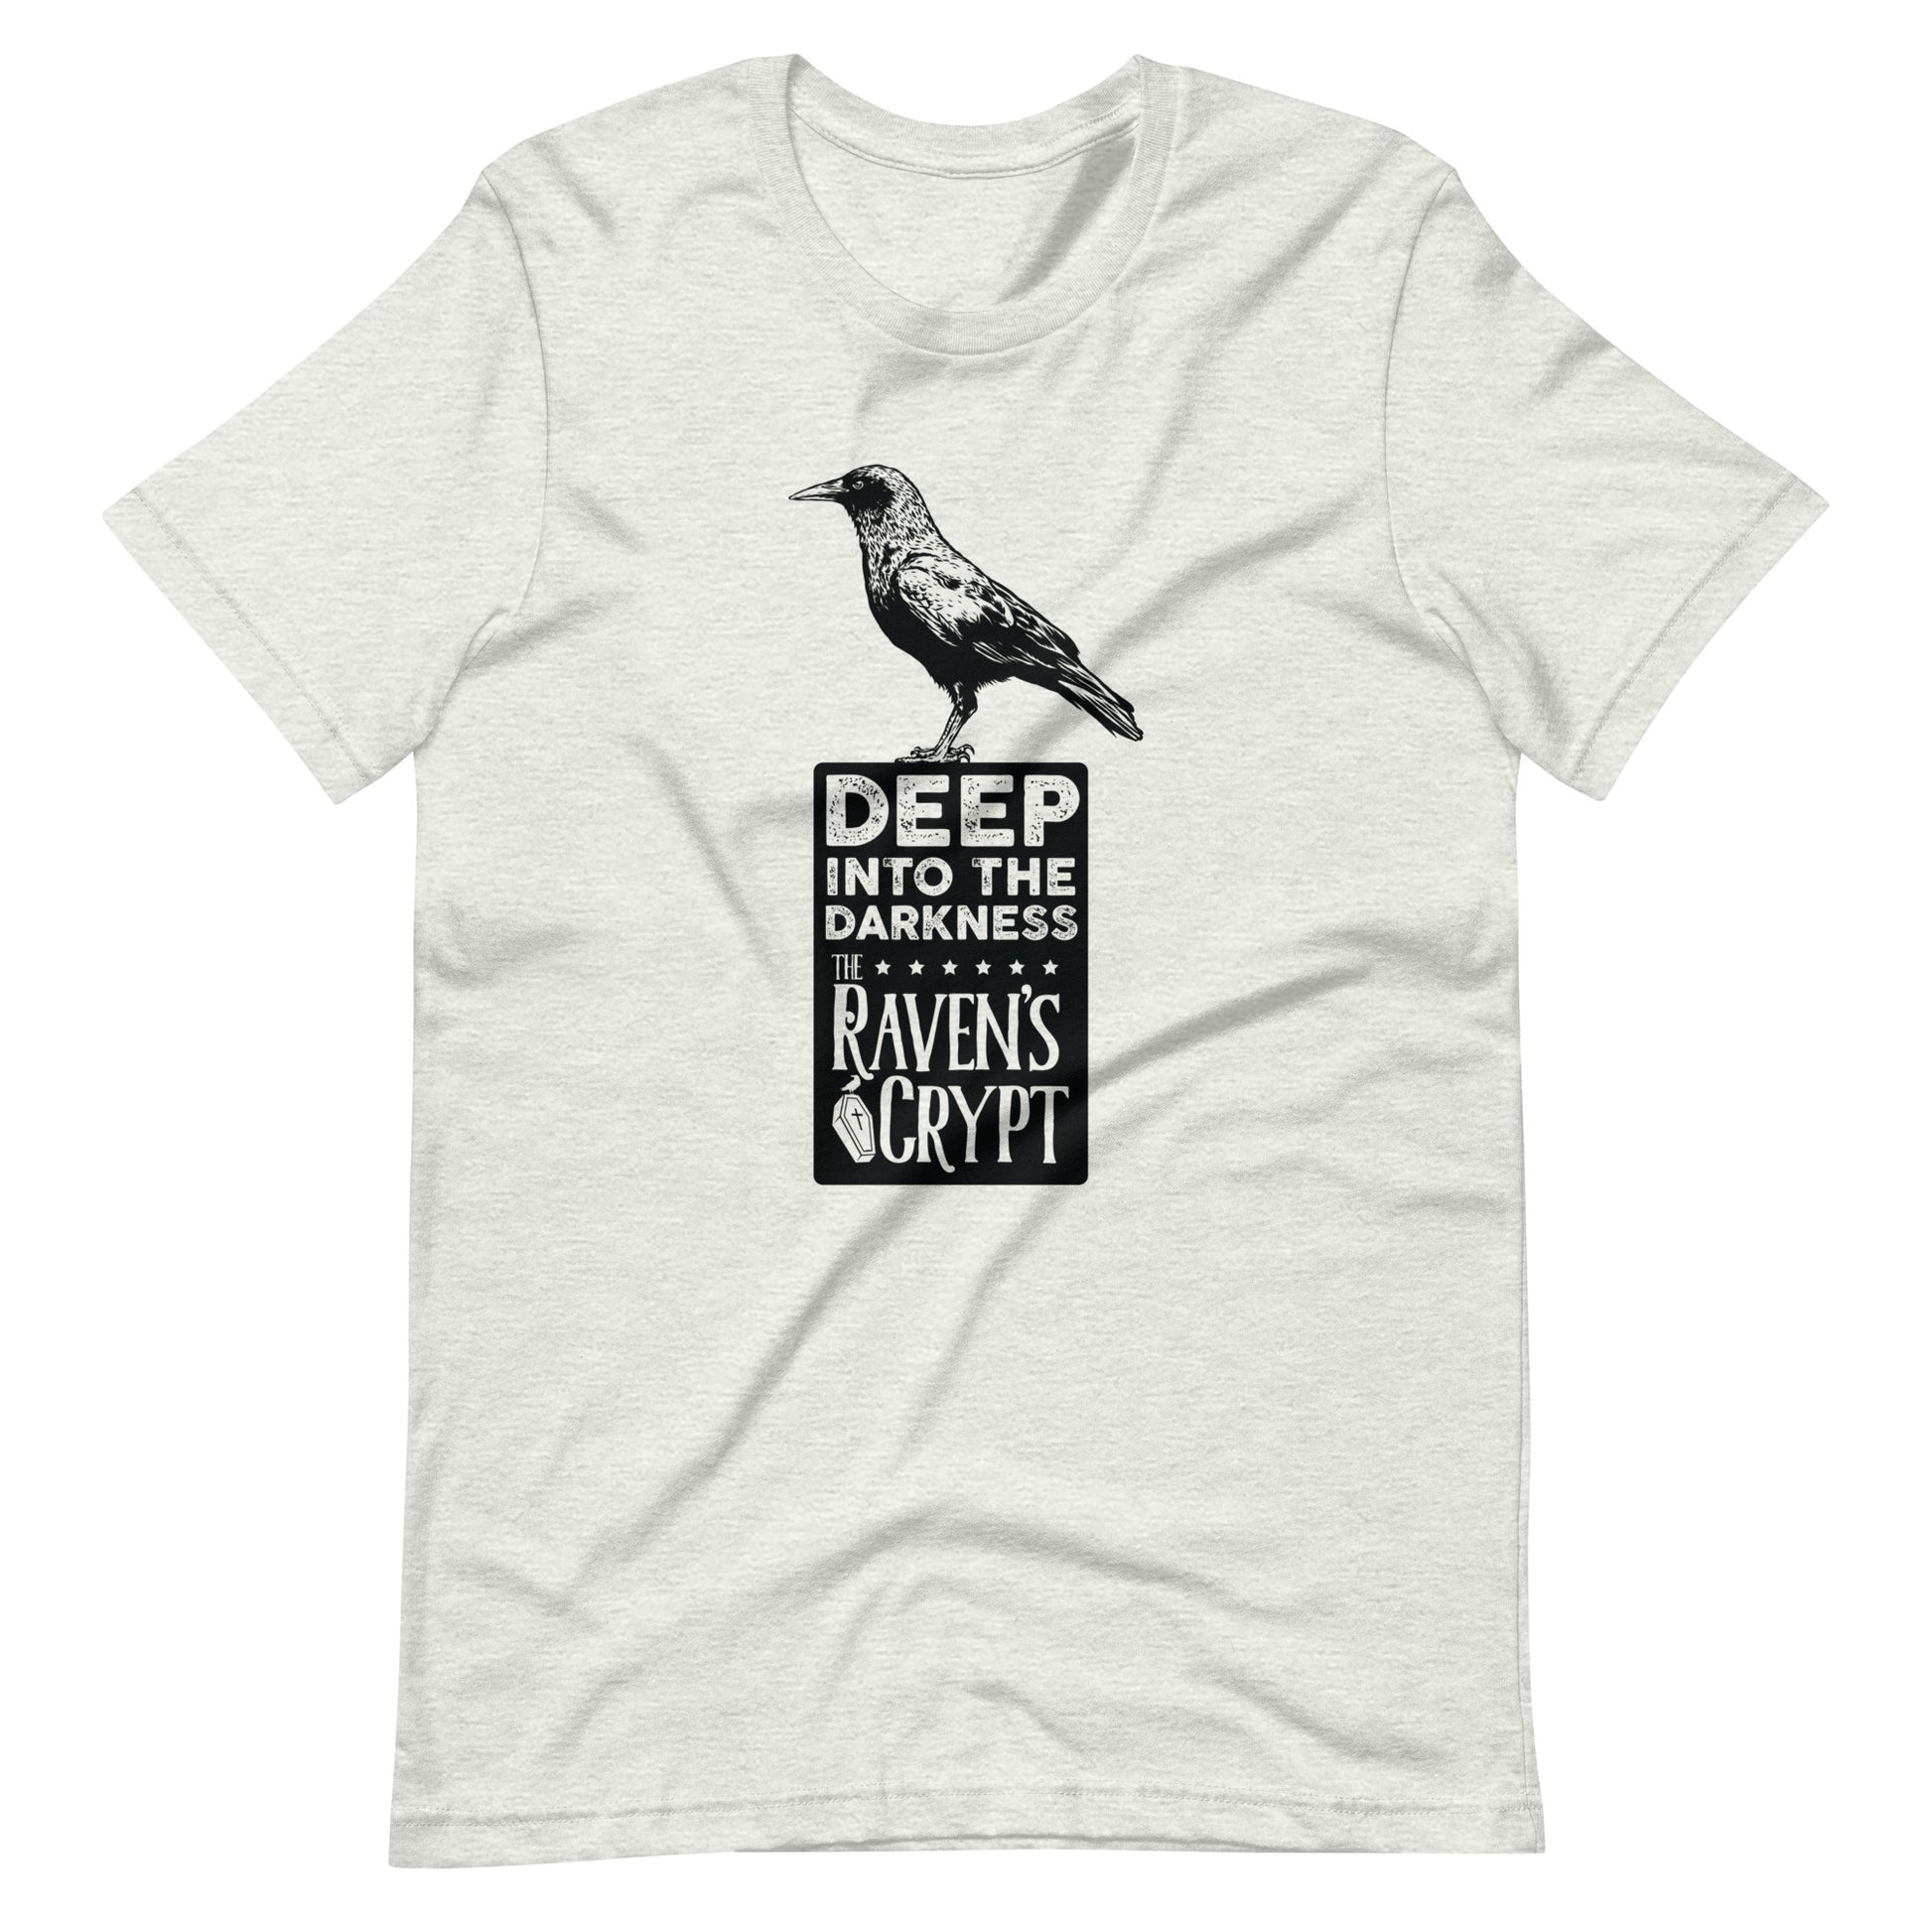 Deep Into the Darkness Crypt 2 - Men's t-shirt - Ash Front